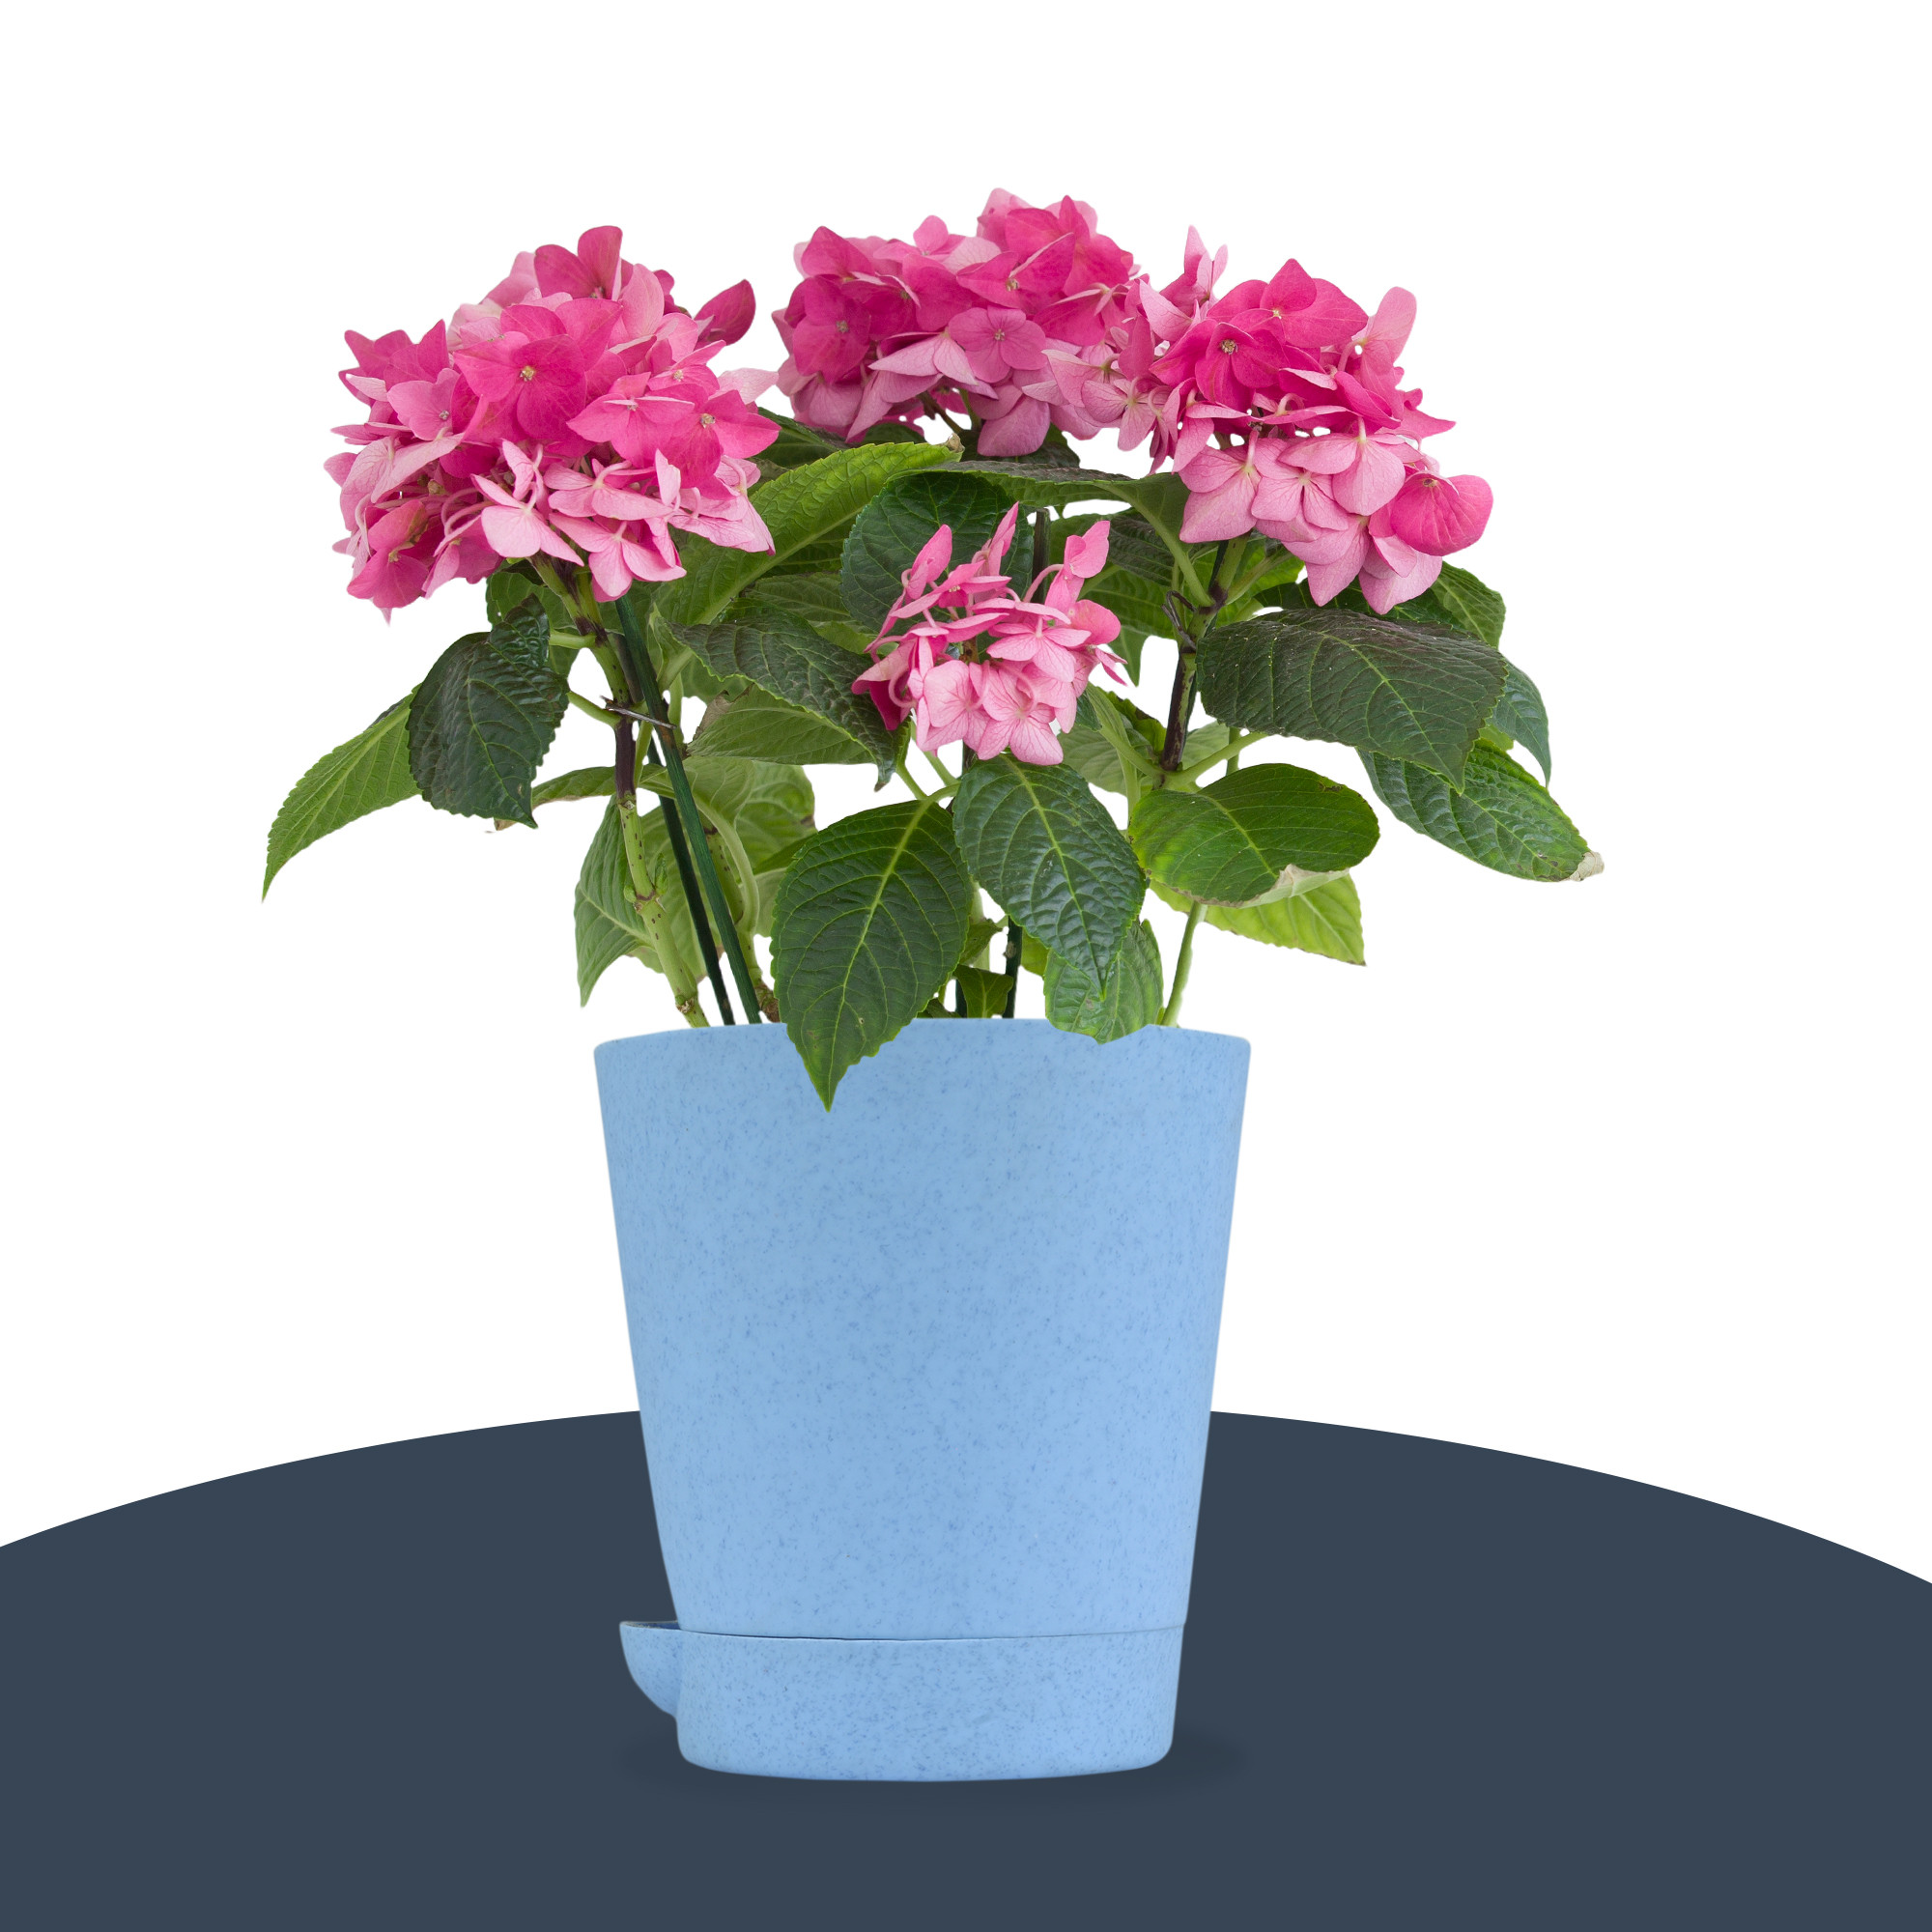 Kuber Industries Flower Pot | Flower Pot for Living Room-Office | Planters for Home-office-Lawns & Garden Décor | Self Watering Flower Planters Pots | Marble Titan | 4 Inch | Blue & Pink